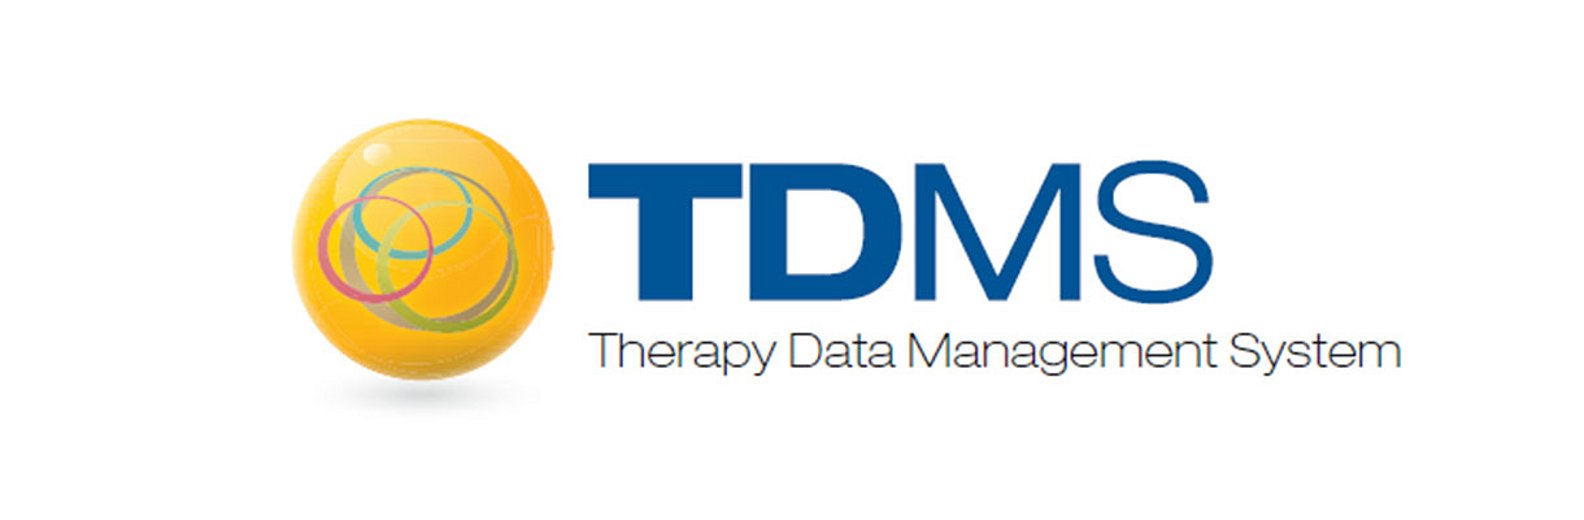 Therapy Data Management System (TDMS)